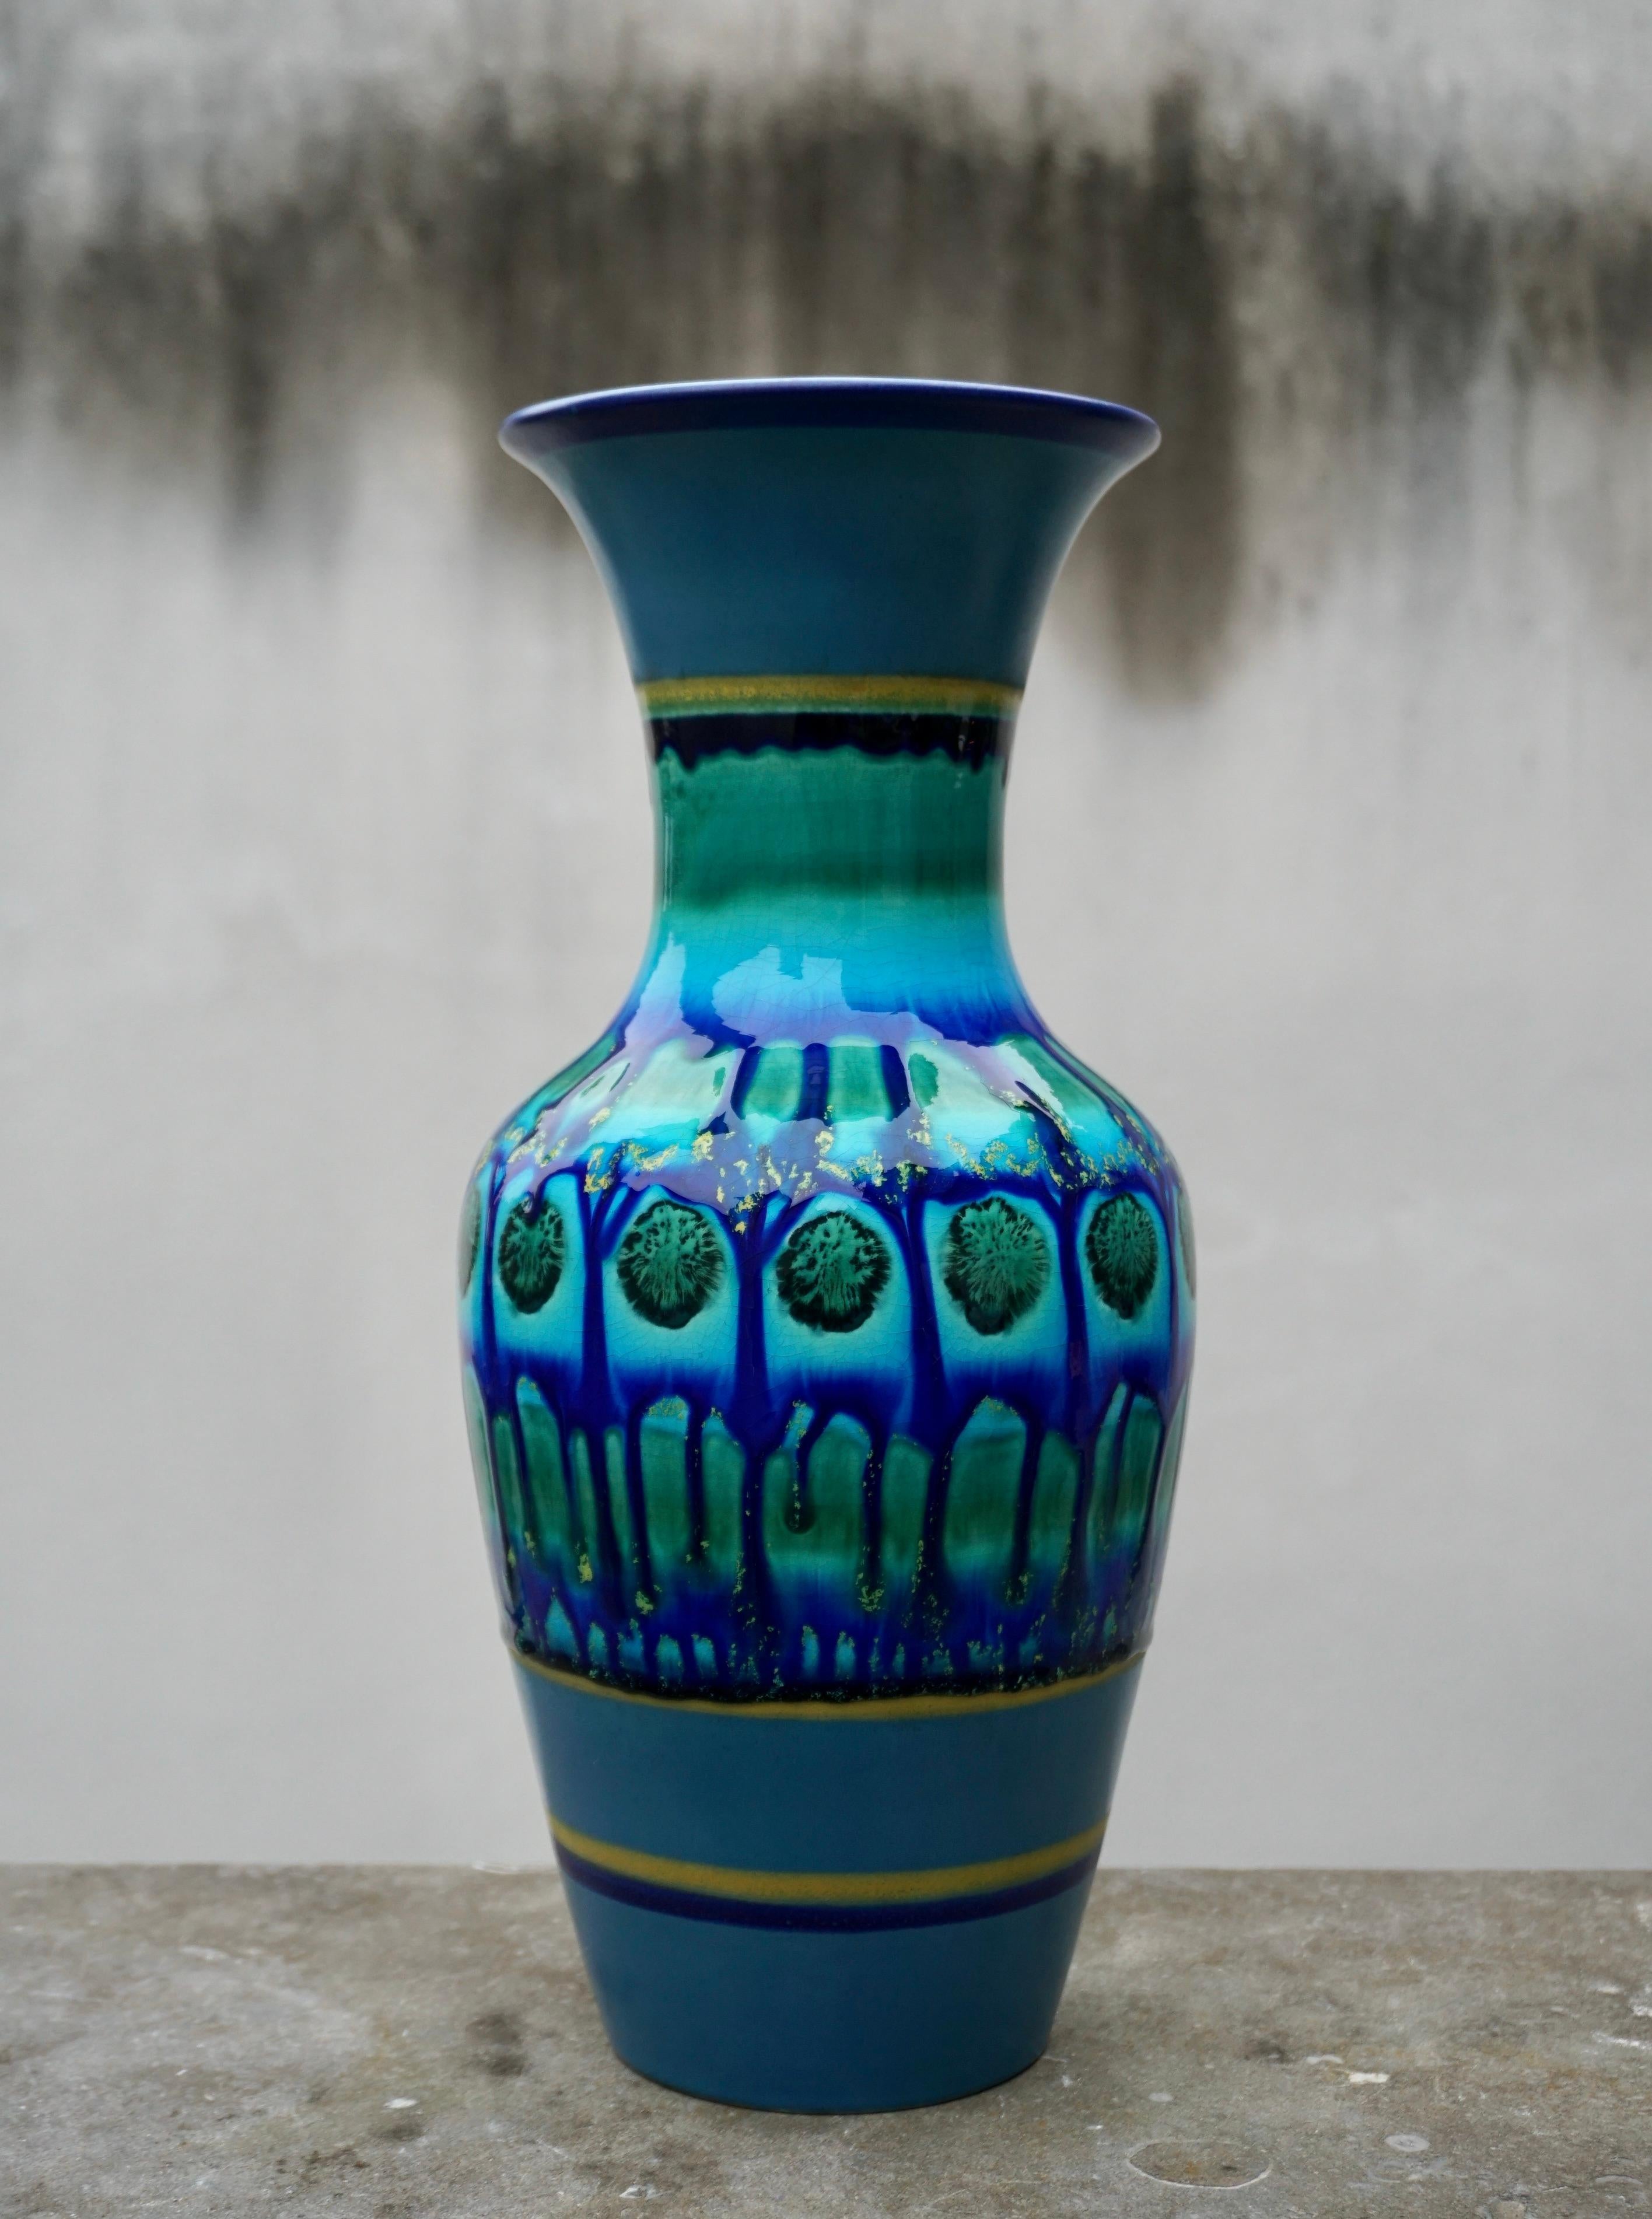 Vintage blue ceramic fat lava style vase marked on base: Flora Holland.
Hand Painted.  

Flora Holland - Gouda porcelain factory circa 1945 - 1980.  
Gouda is a generic term describing pottery produced in Gouda, The Netherlands and brightly colored